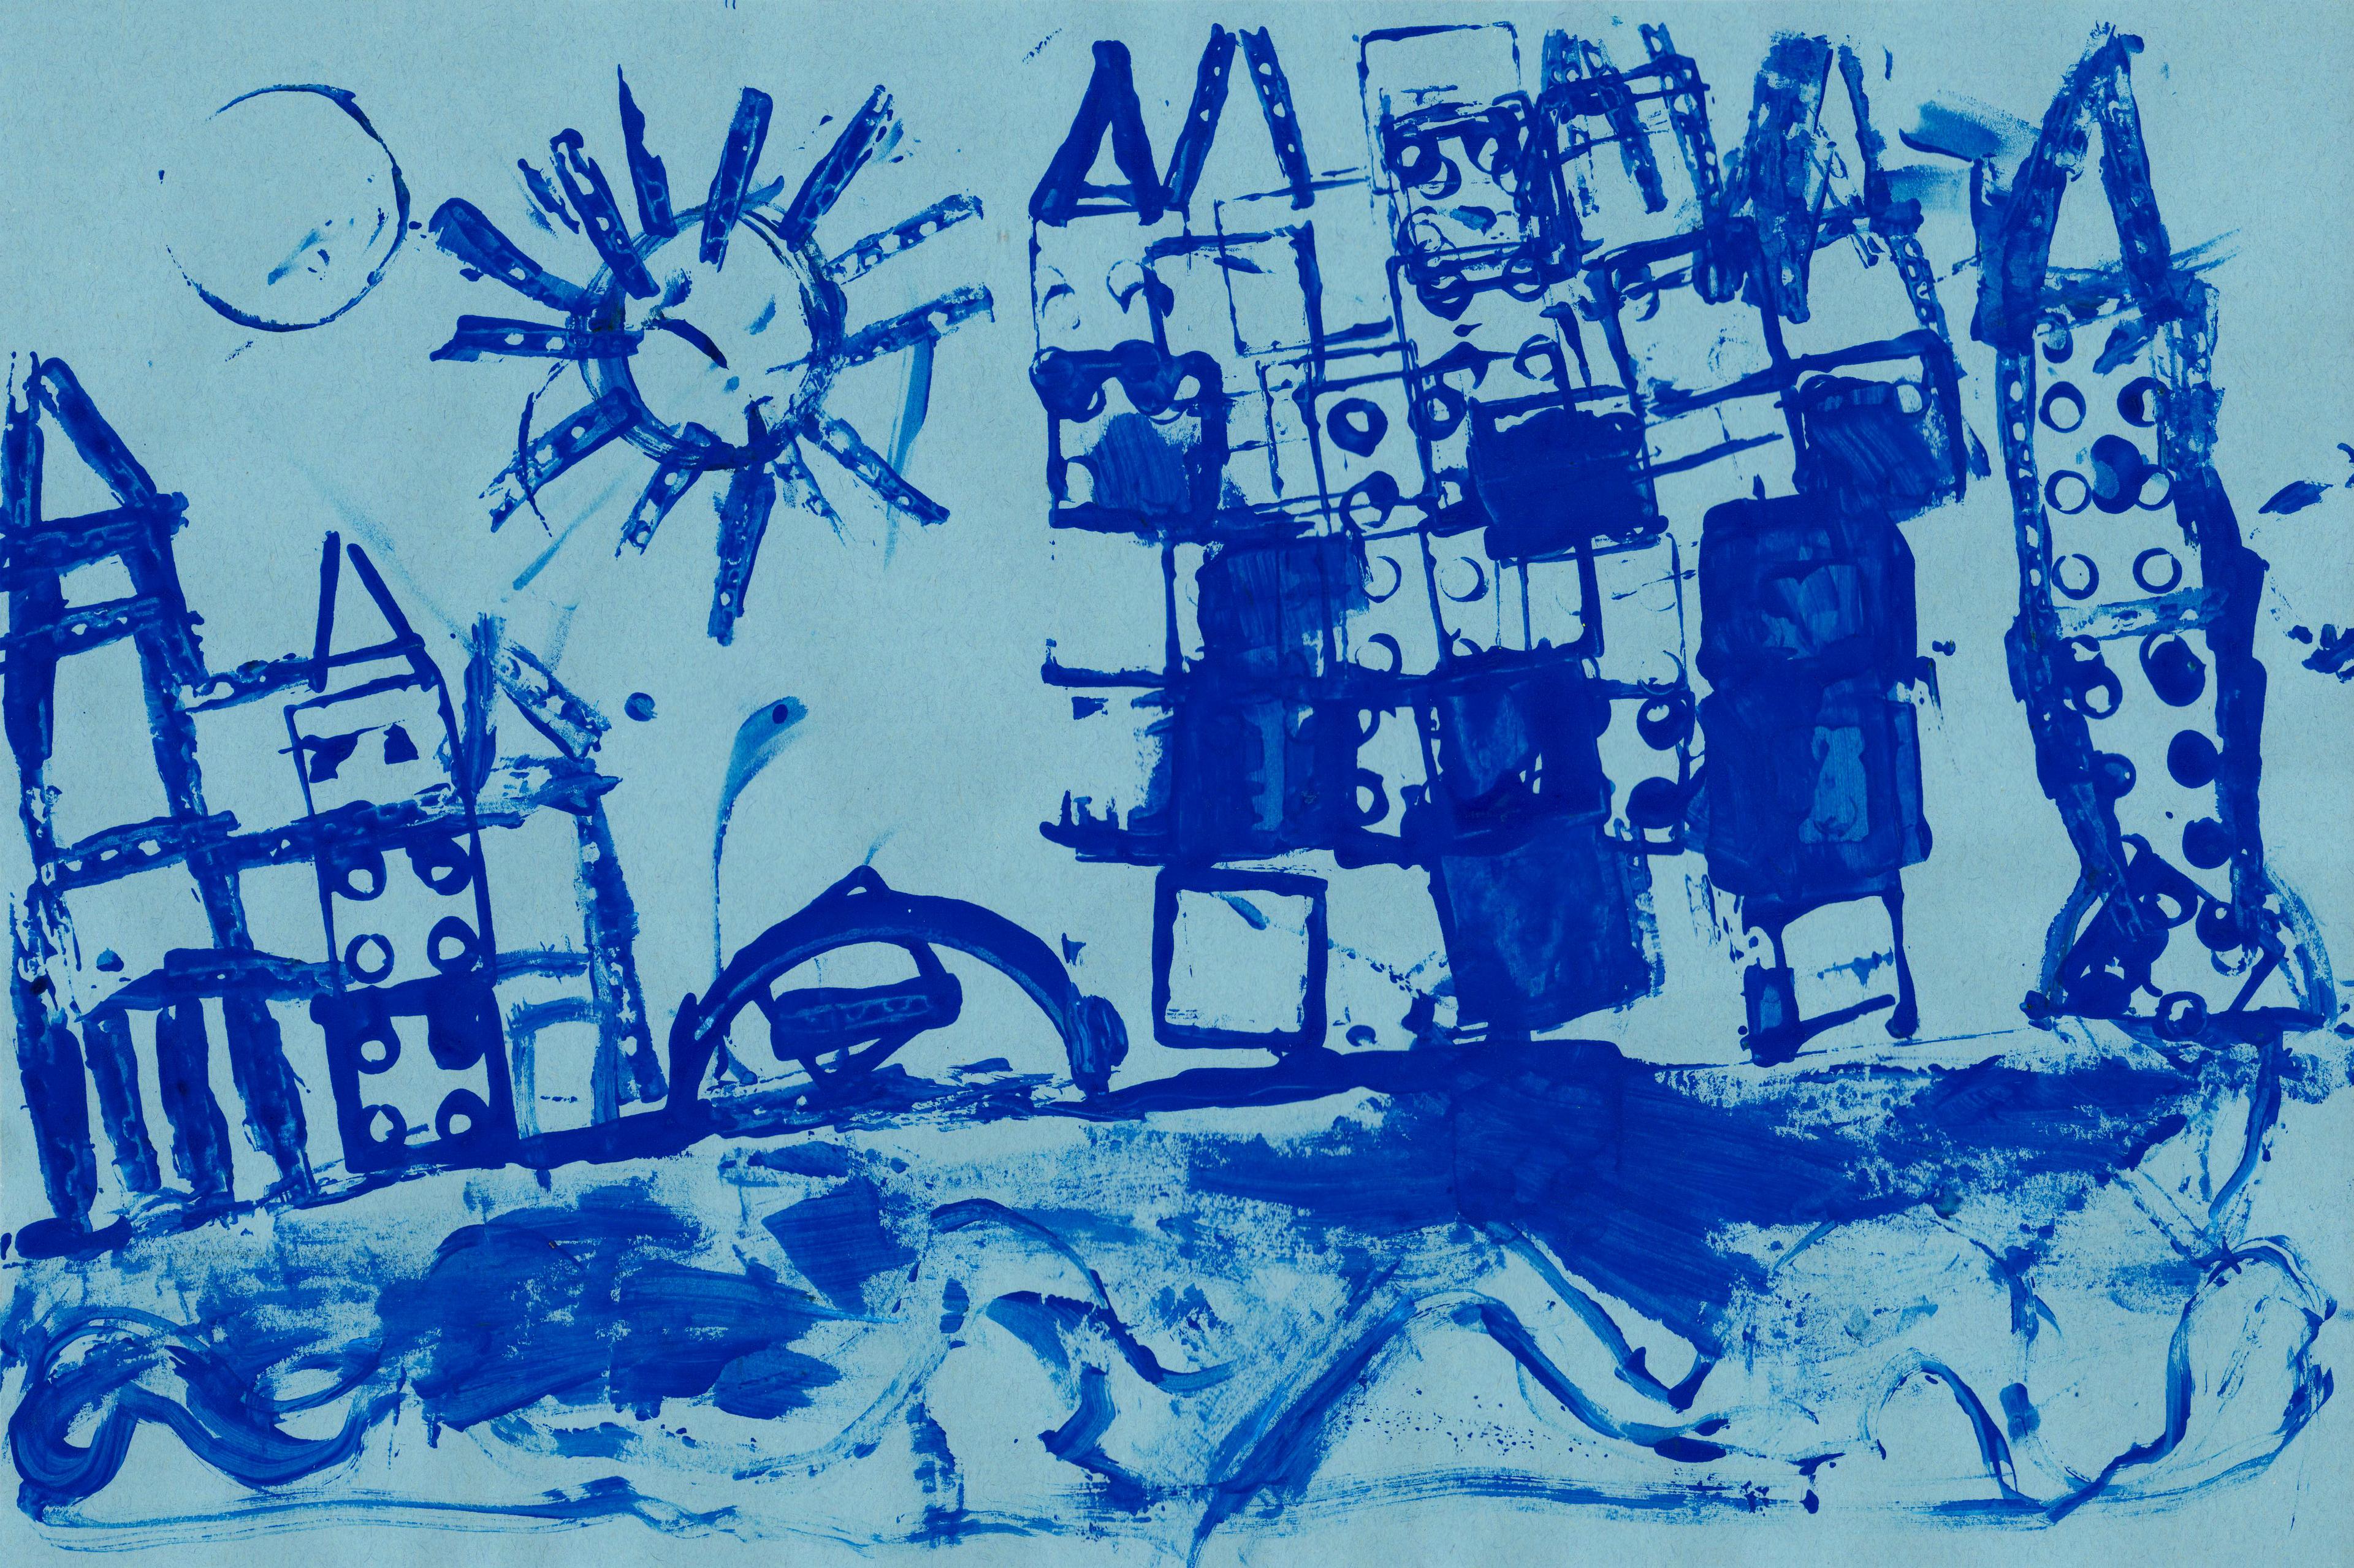 Tempera drawing of a deep blue cityscape drawn by stamping various objects dipped in dark blue paint on a light blue–paper background. Towers in the shapes of rectangular Lego bricks with triangular roof tops rise from the ground, and a round sun with extending light beams hangs in the air near the top center of the image.